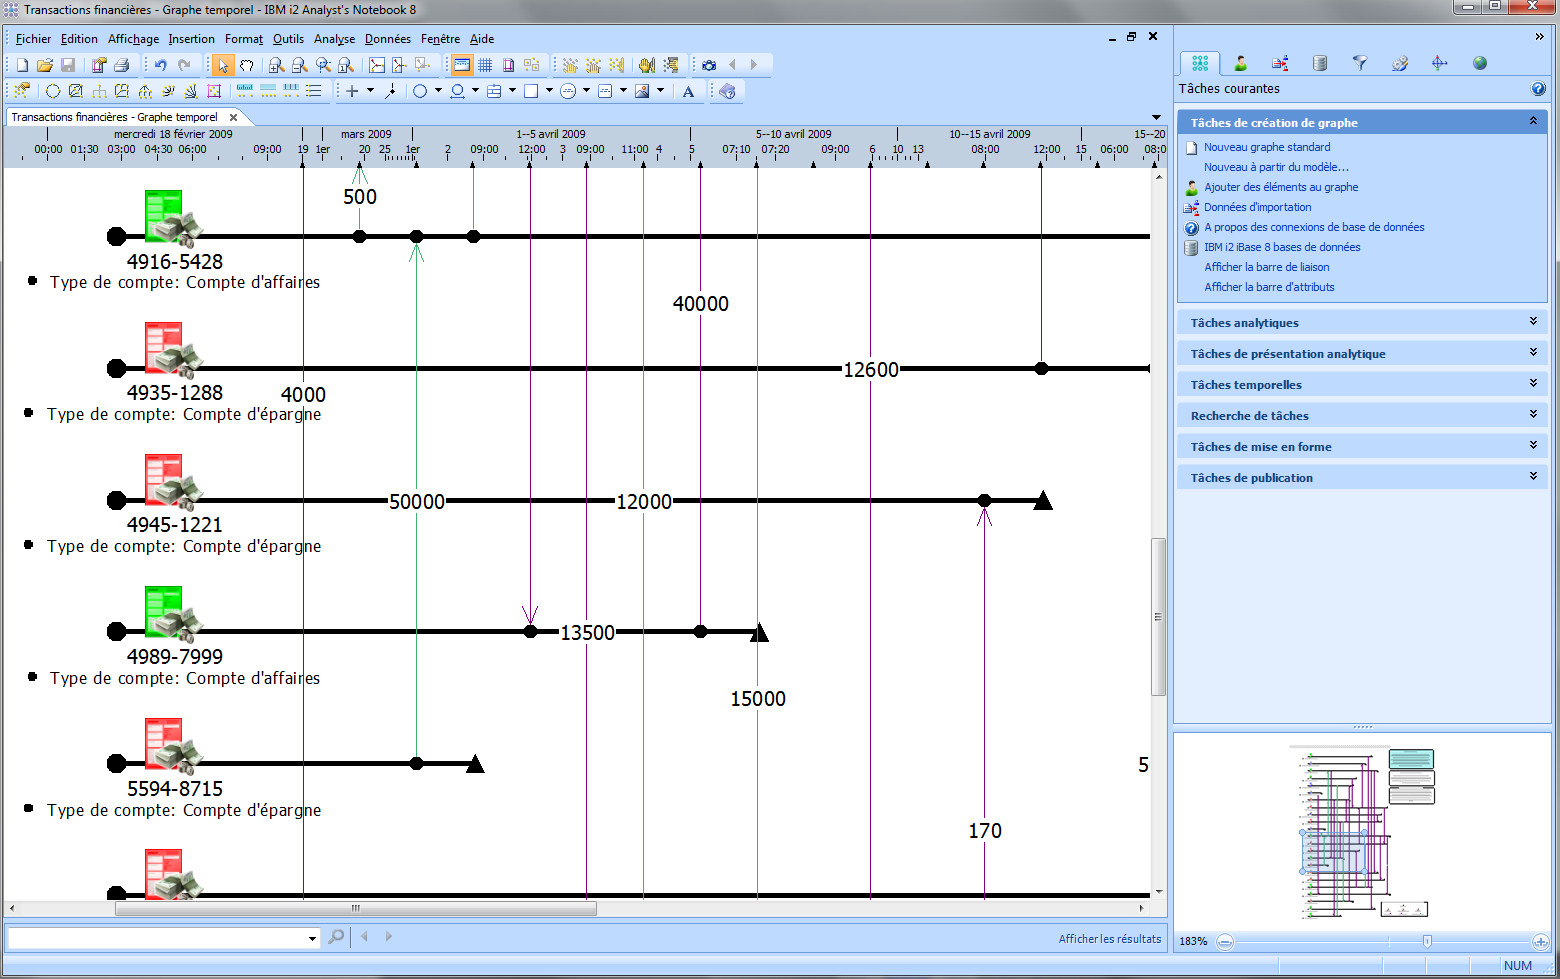 Example of Time Analysis using IBM i2 Analyst's Notebook